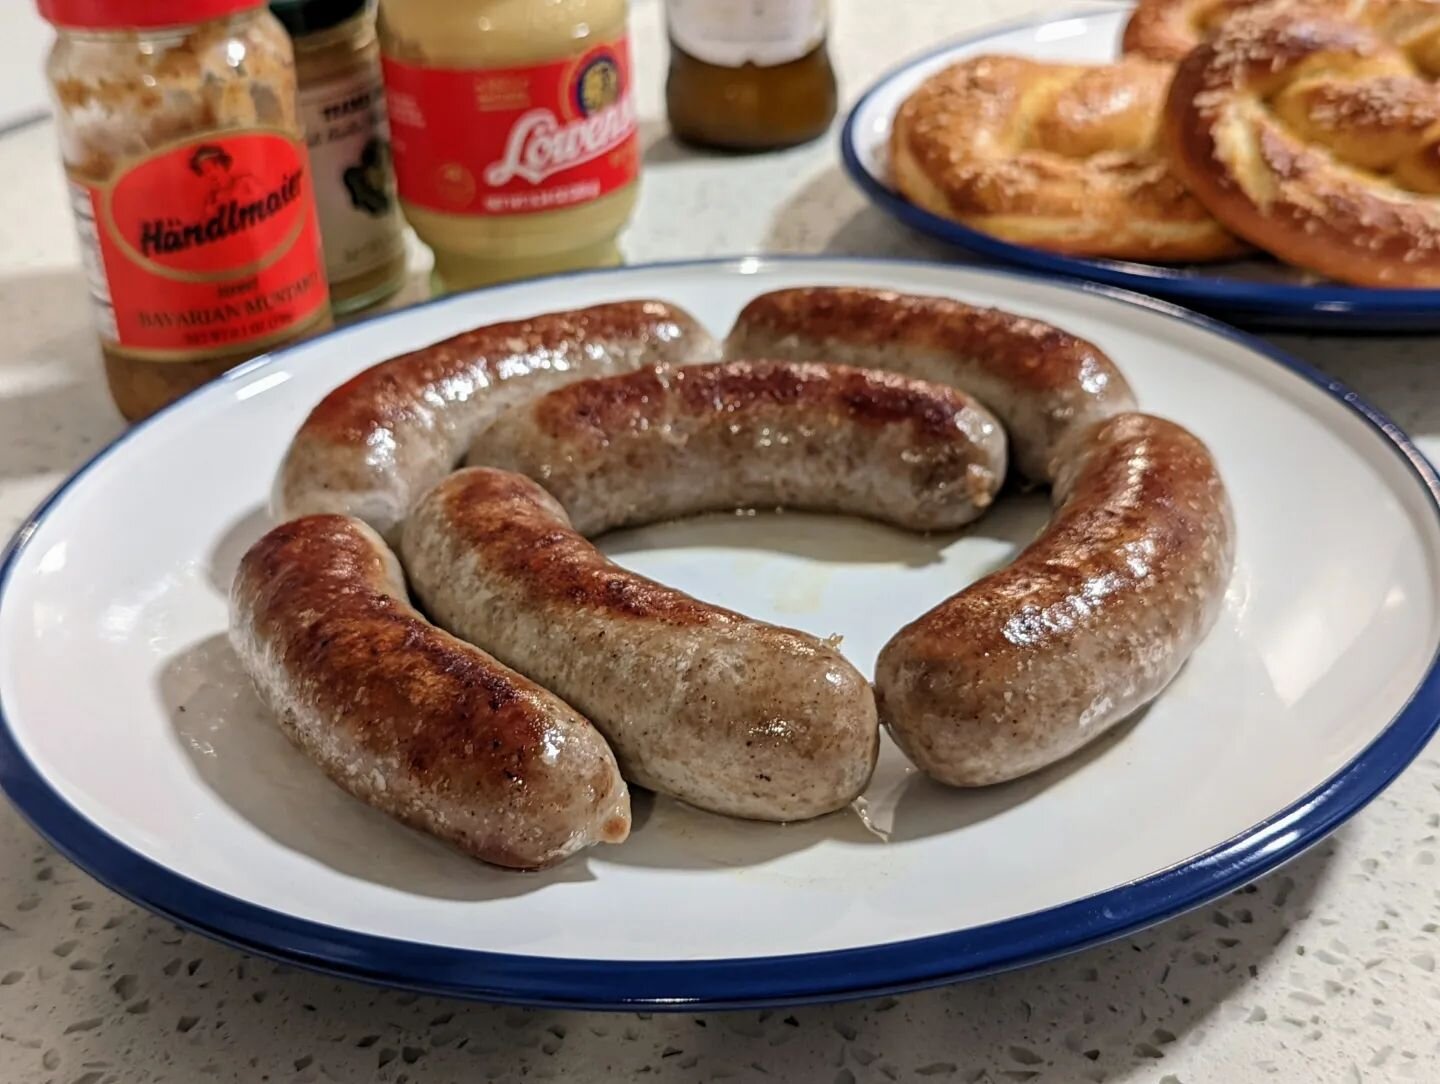 Made a crapload of sausage. Never did it before, so I'm really happy with how they turned out! Longanisa, bratwurst, and spicy Italian. Also, homemade ensaymada, pretzels, and ciabatta/marinara. What a weekend. // #sausage #wiener #filipinofood #germ